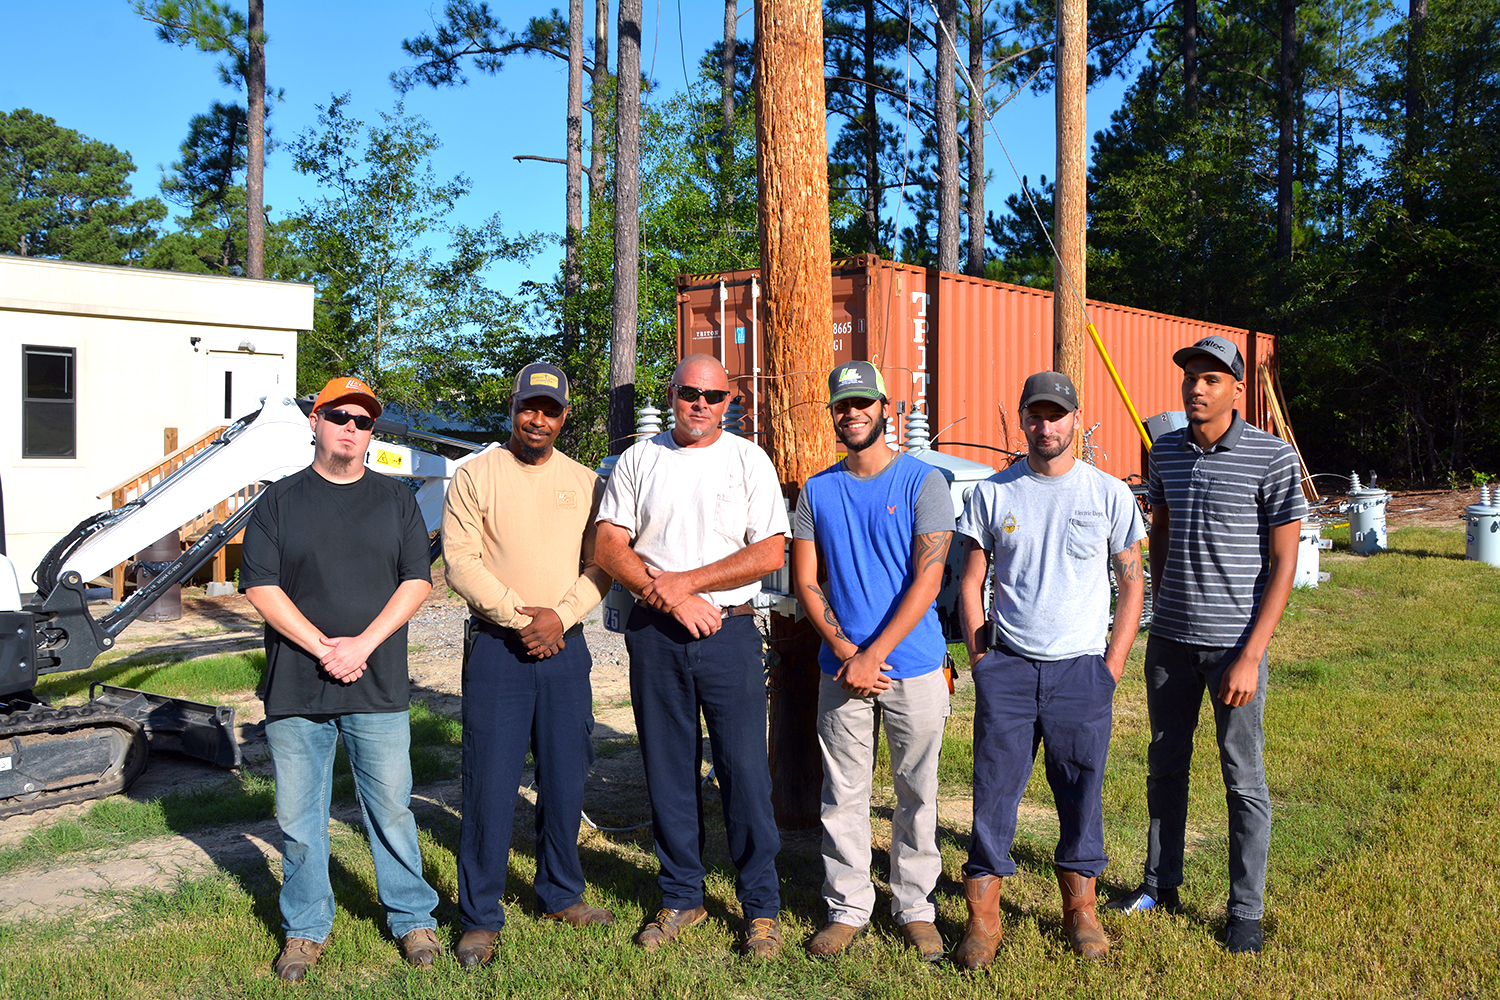 Pictured are the six people from the utility industry who took the Transformer Concepts class.